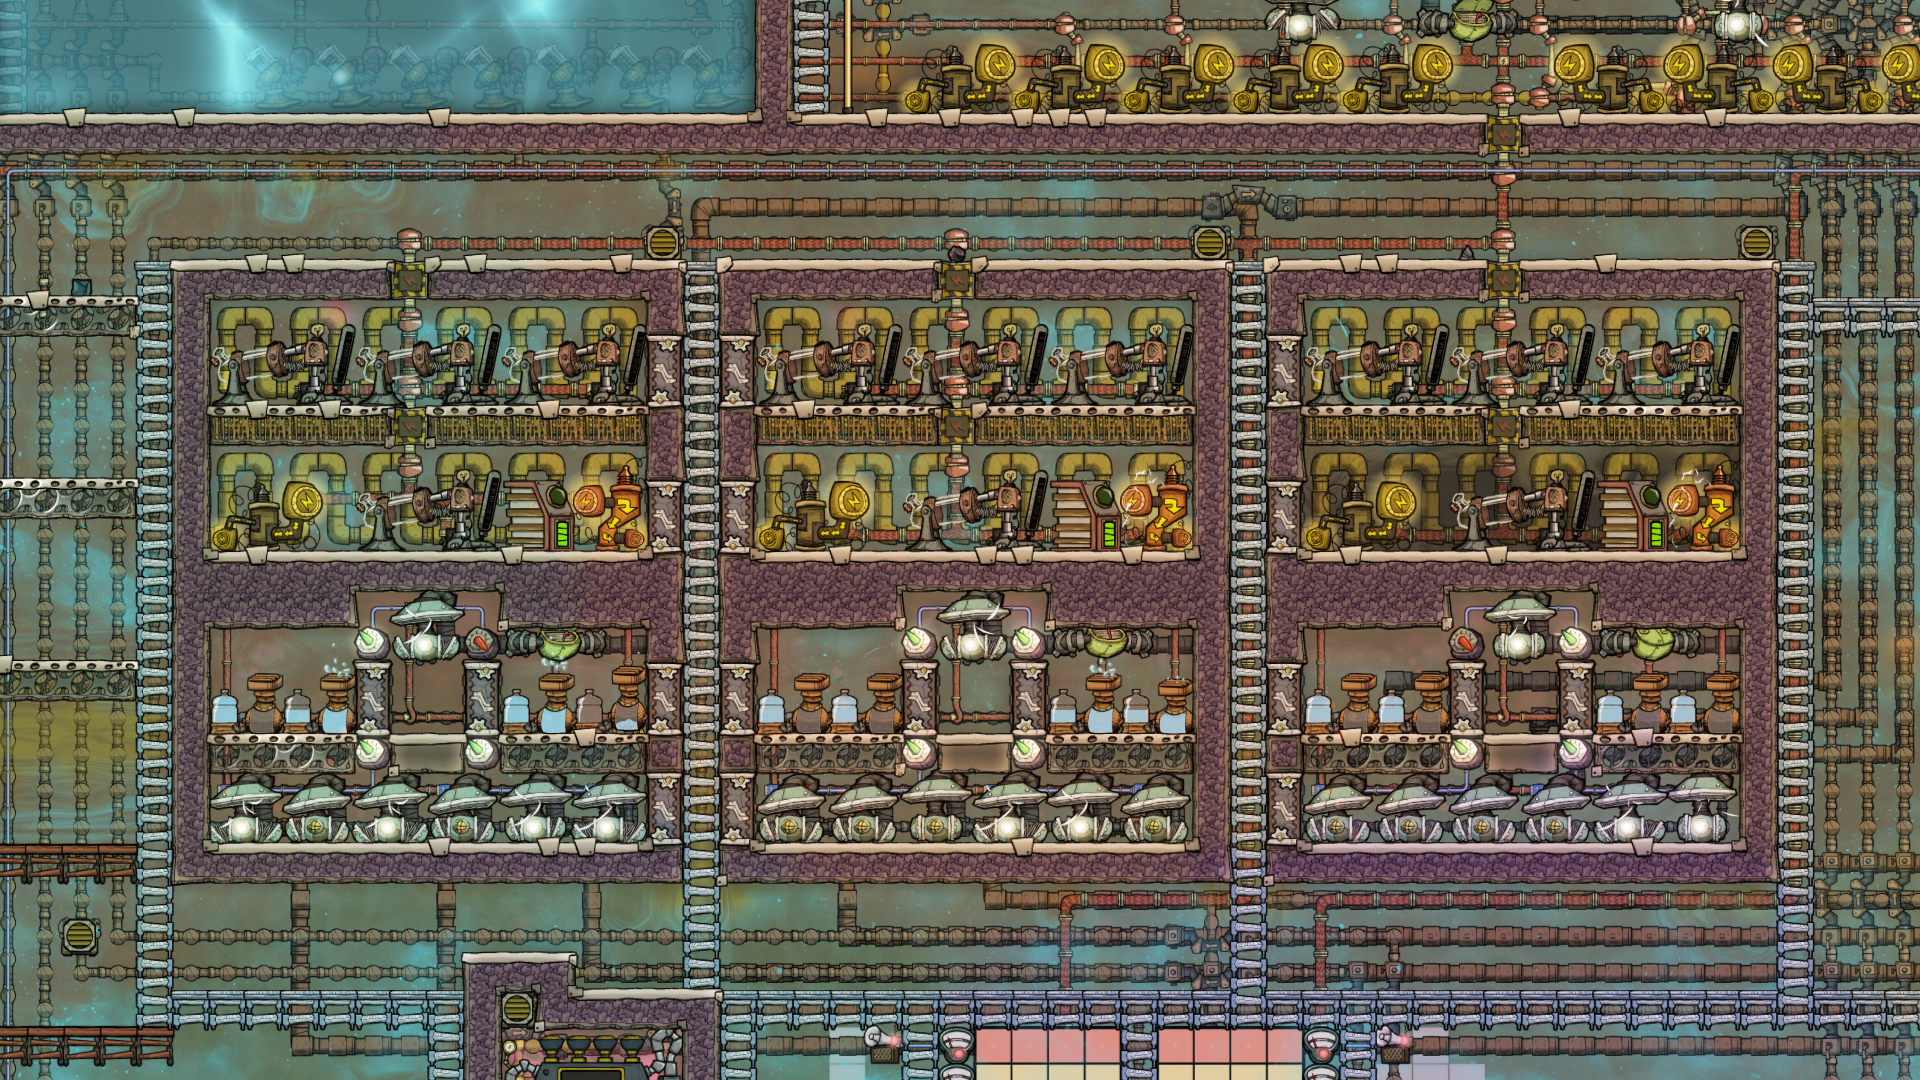 Optimal Hot Steam Vent Tamer - [Oxygen Not Included] - General